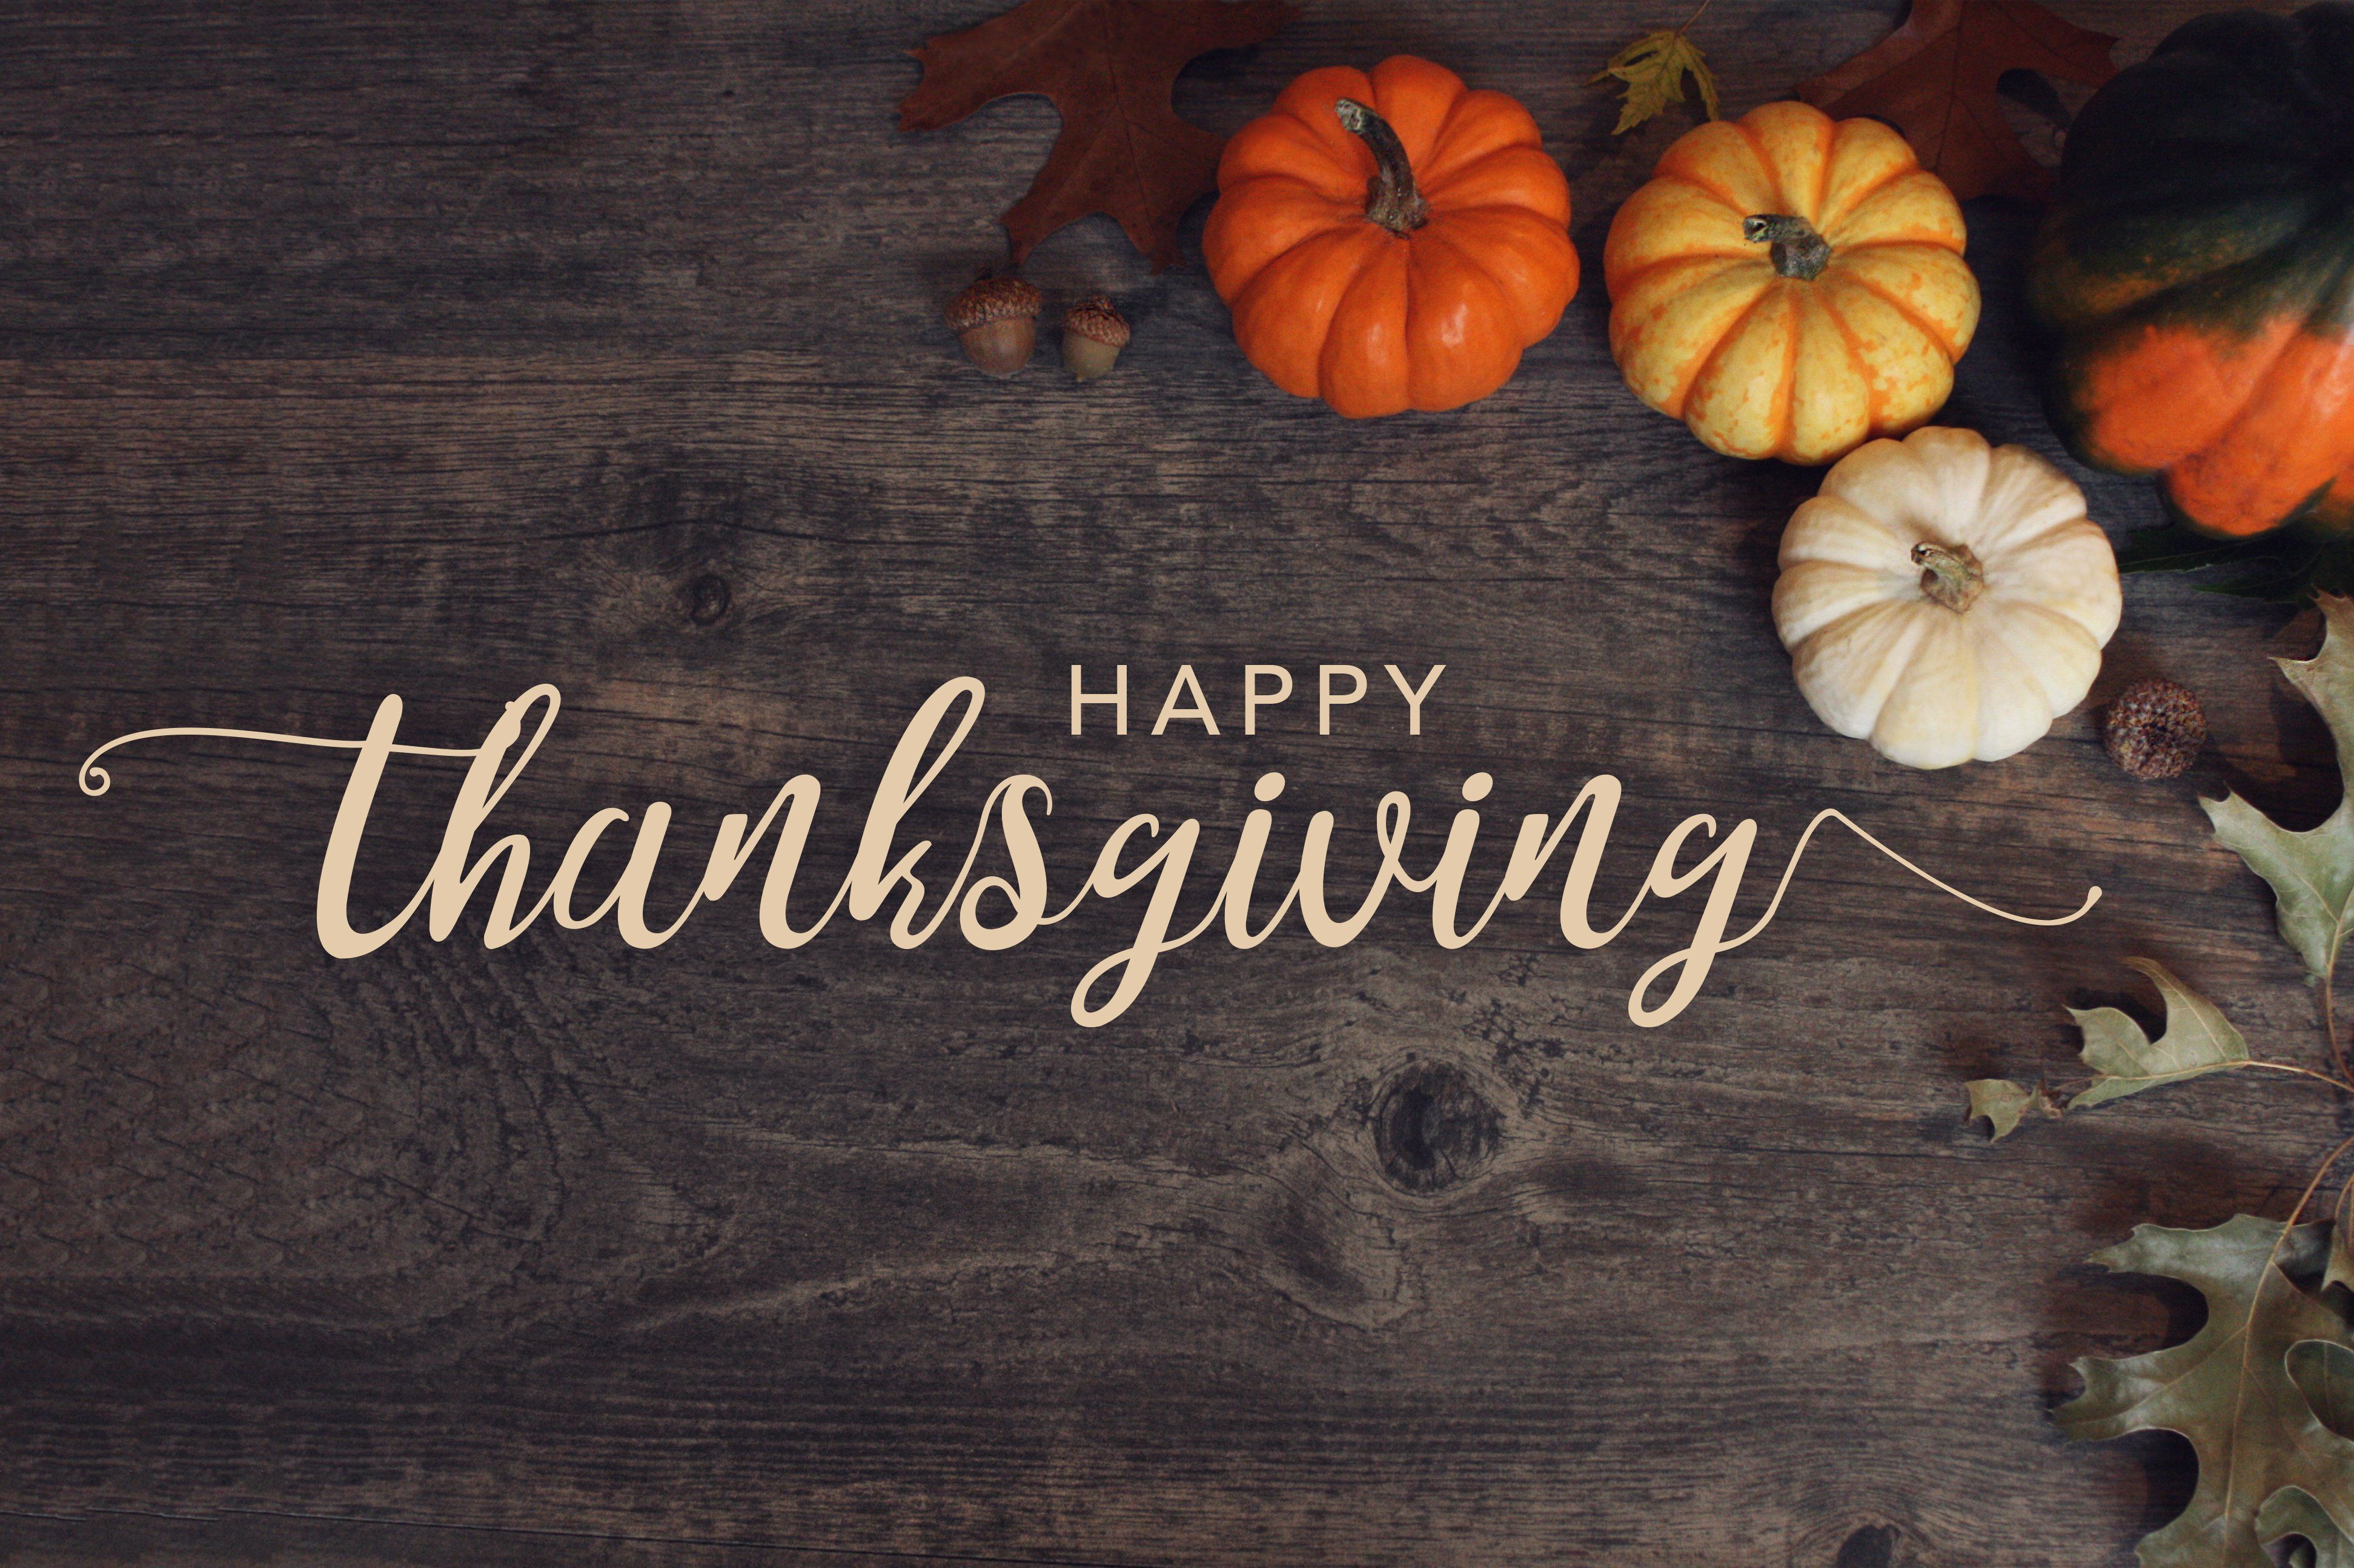 happy-thanksgiving-2020-wallpapers-wallpaper-cave